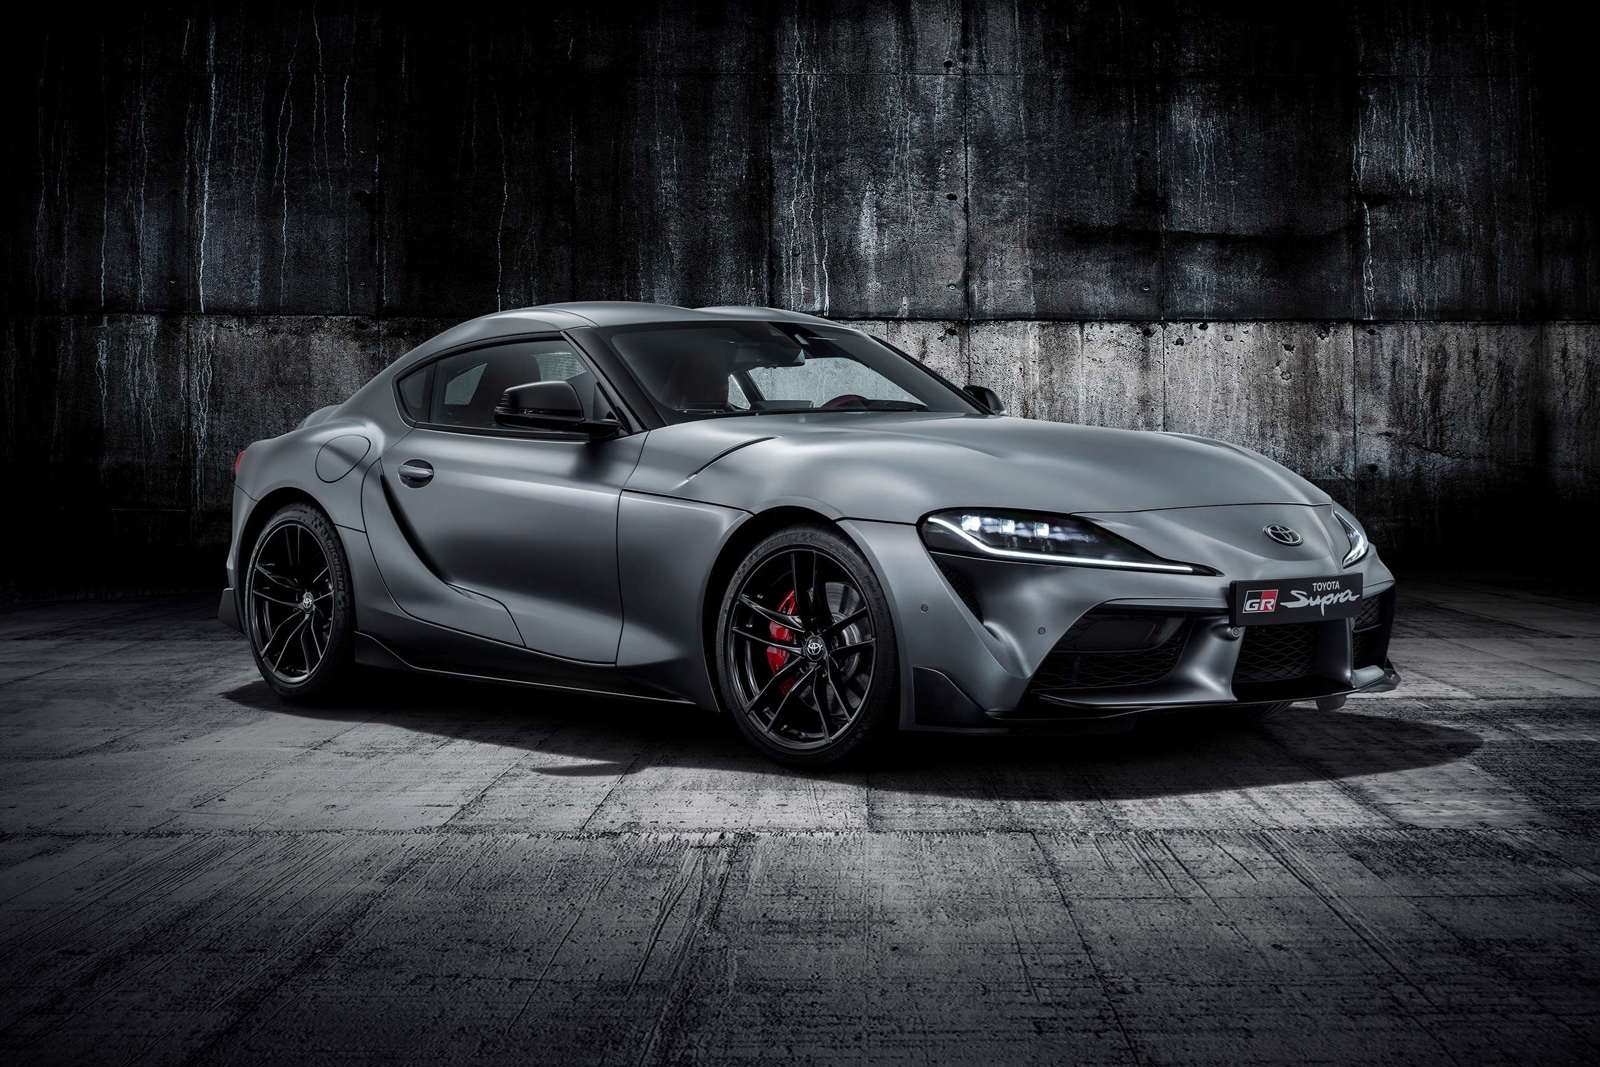 The new Toyota Supra: it's finally here!